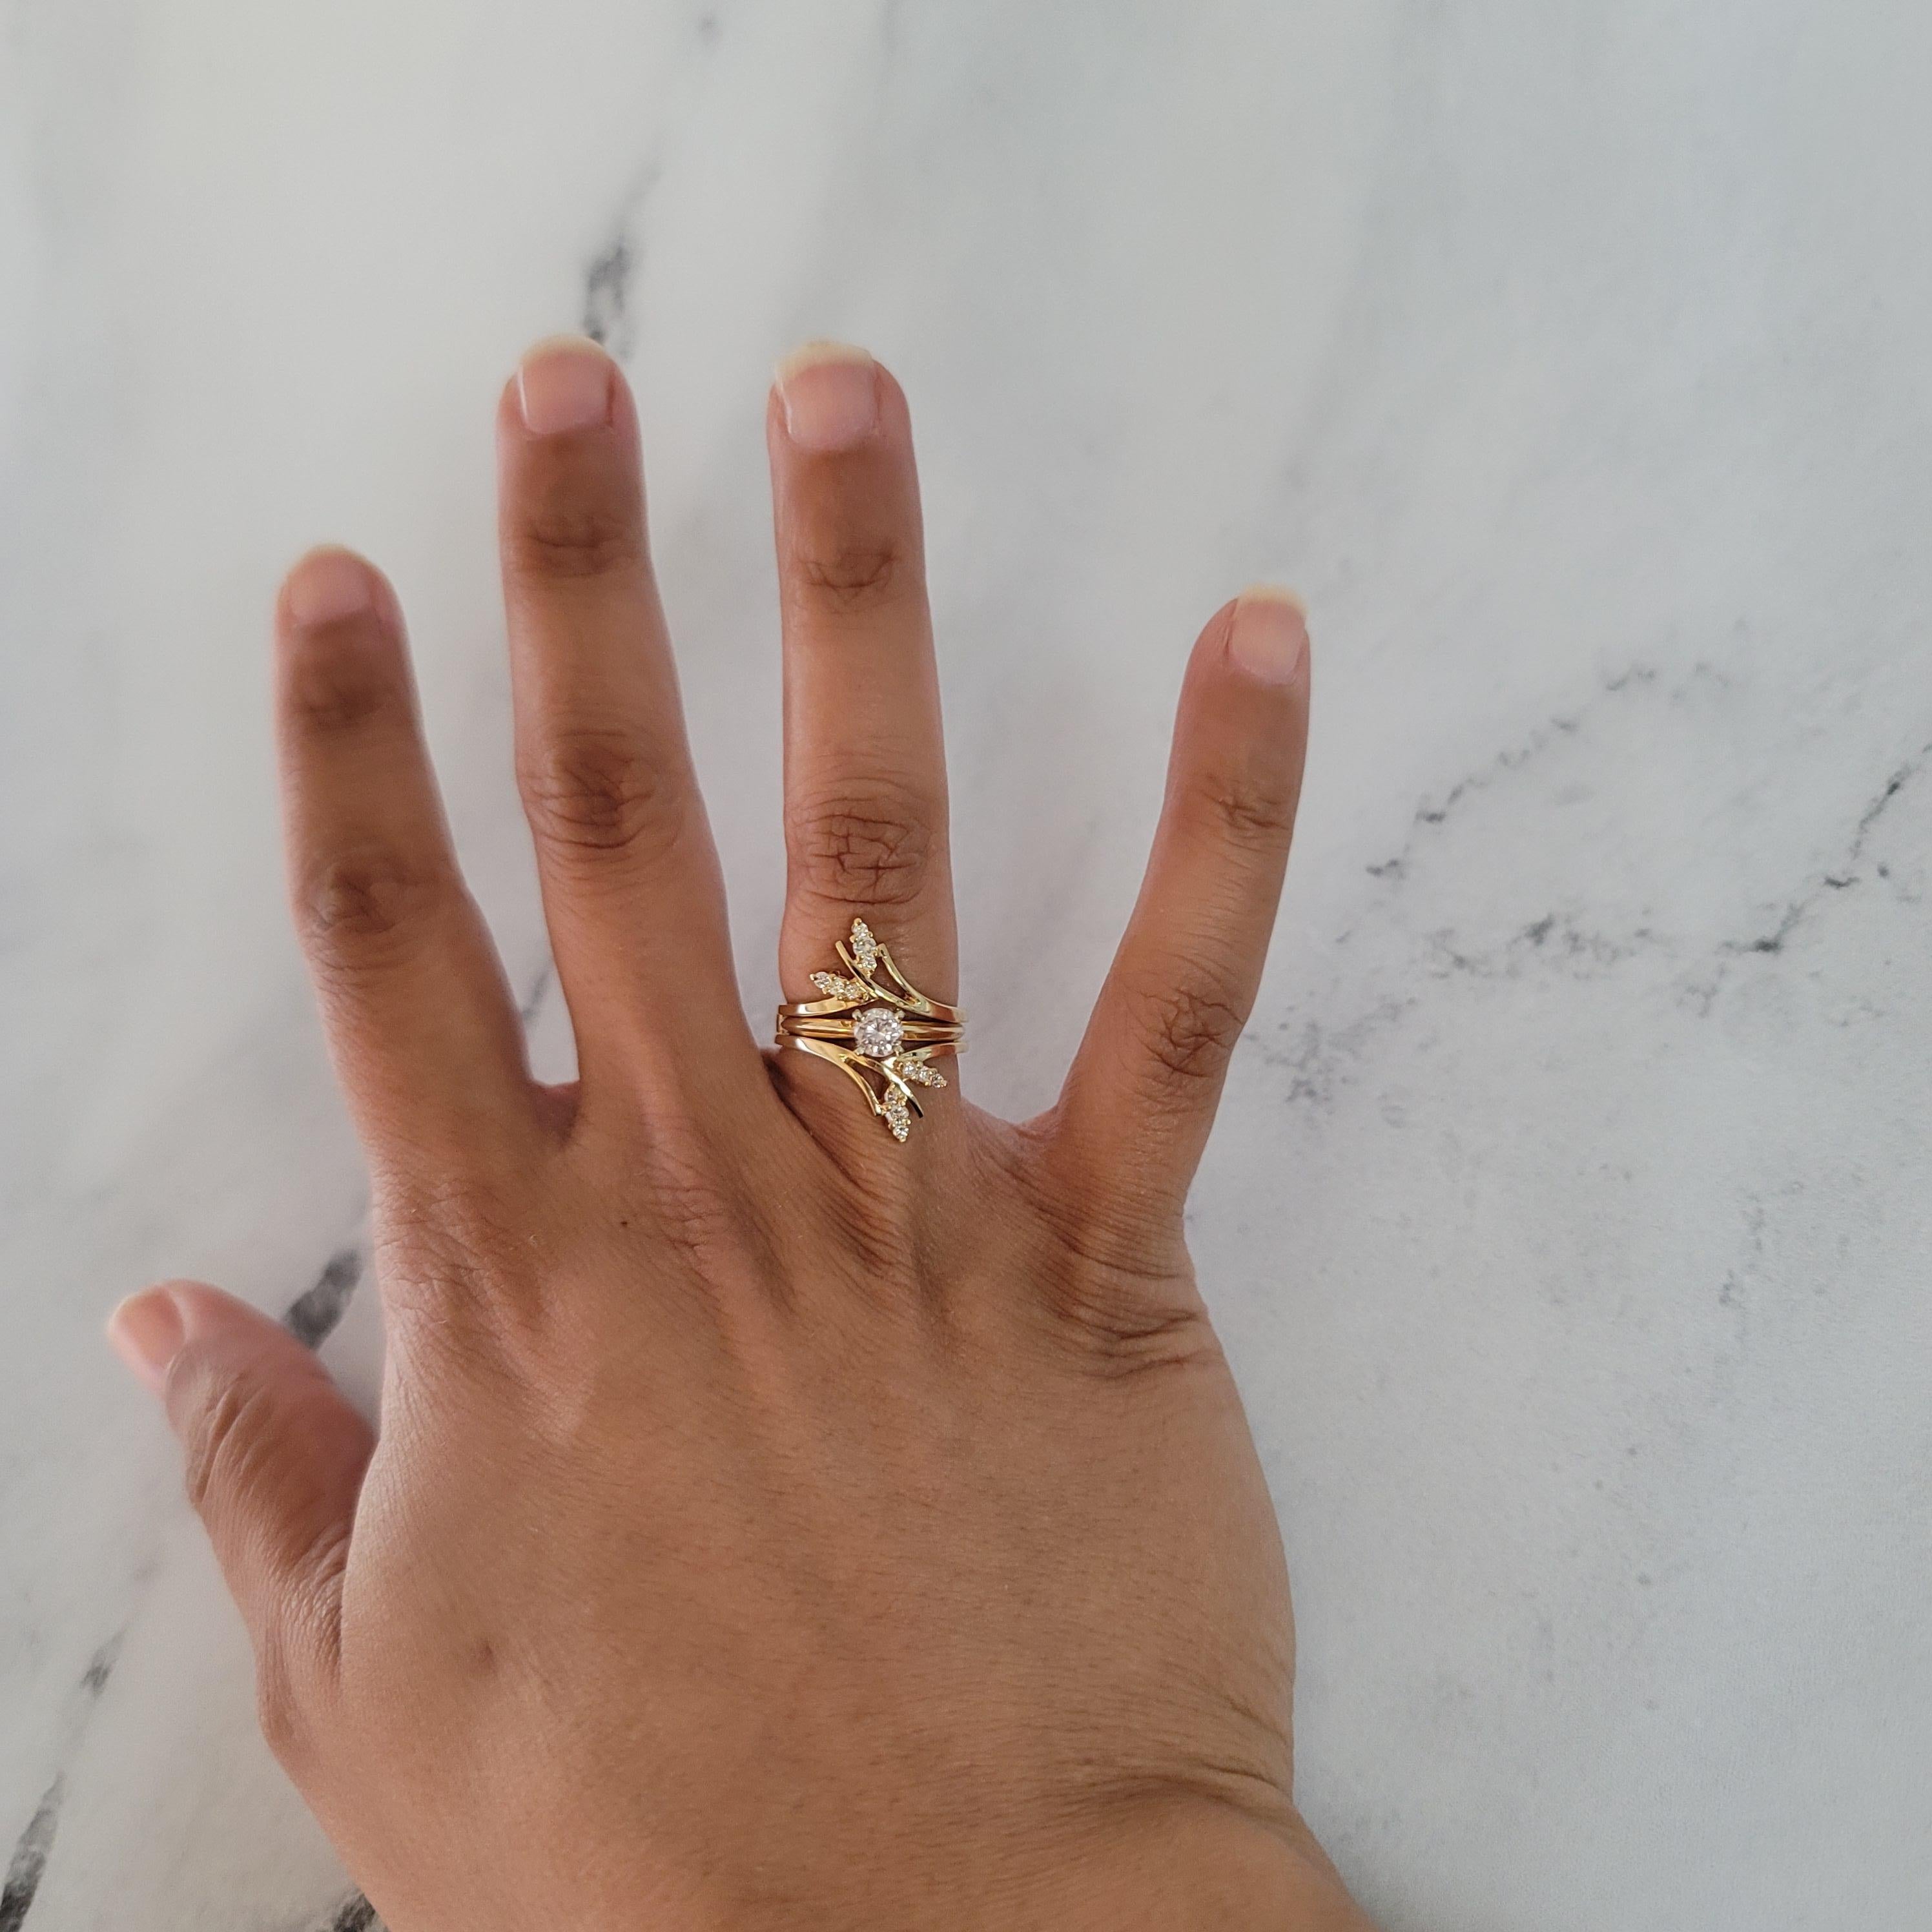 ♥ Ring Summary ♥

Main Stone: Diamond
Approx. Carat Weight: .33cttw
Diamond Clarity: VS2/SI1
Diamond Color: H
Stone Cut: Round
Band Material: 14k Yellow Gold
Gap Measurement: 5mm
Dimension Height: 22mm
**Ring Guard Only 